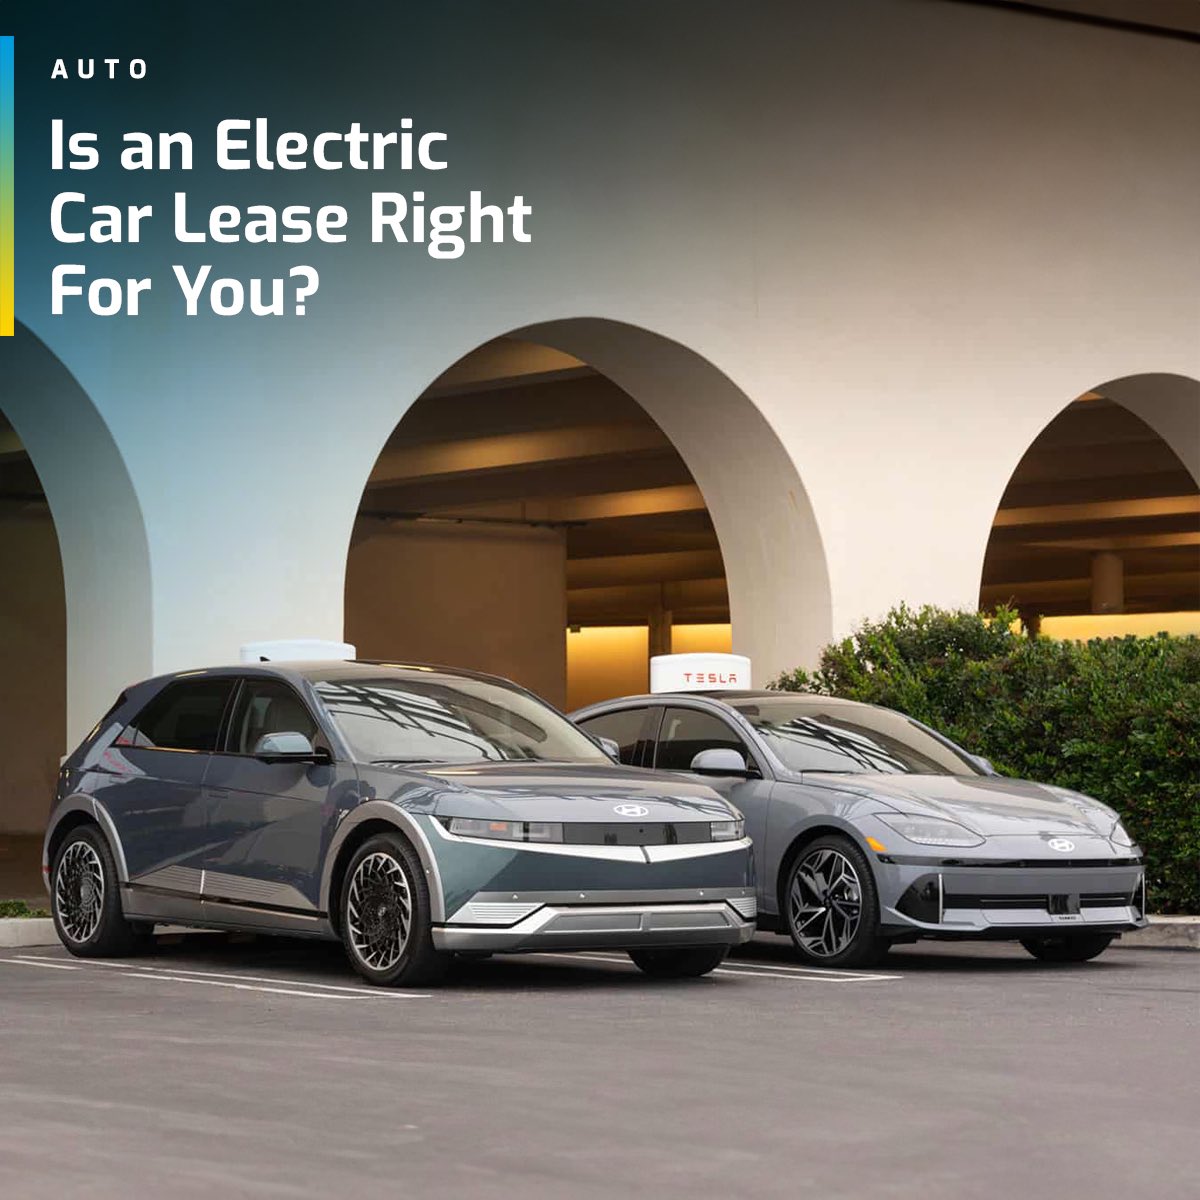 With manufacturers offering special deals on new EV leases, could leasing an EV be right for you? 🤔

Find out: electrifynews.com/news/auto/is-a…

#ElectrifyNews #EV #ElectricVehicle #EVLease #EVCharging